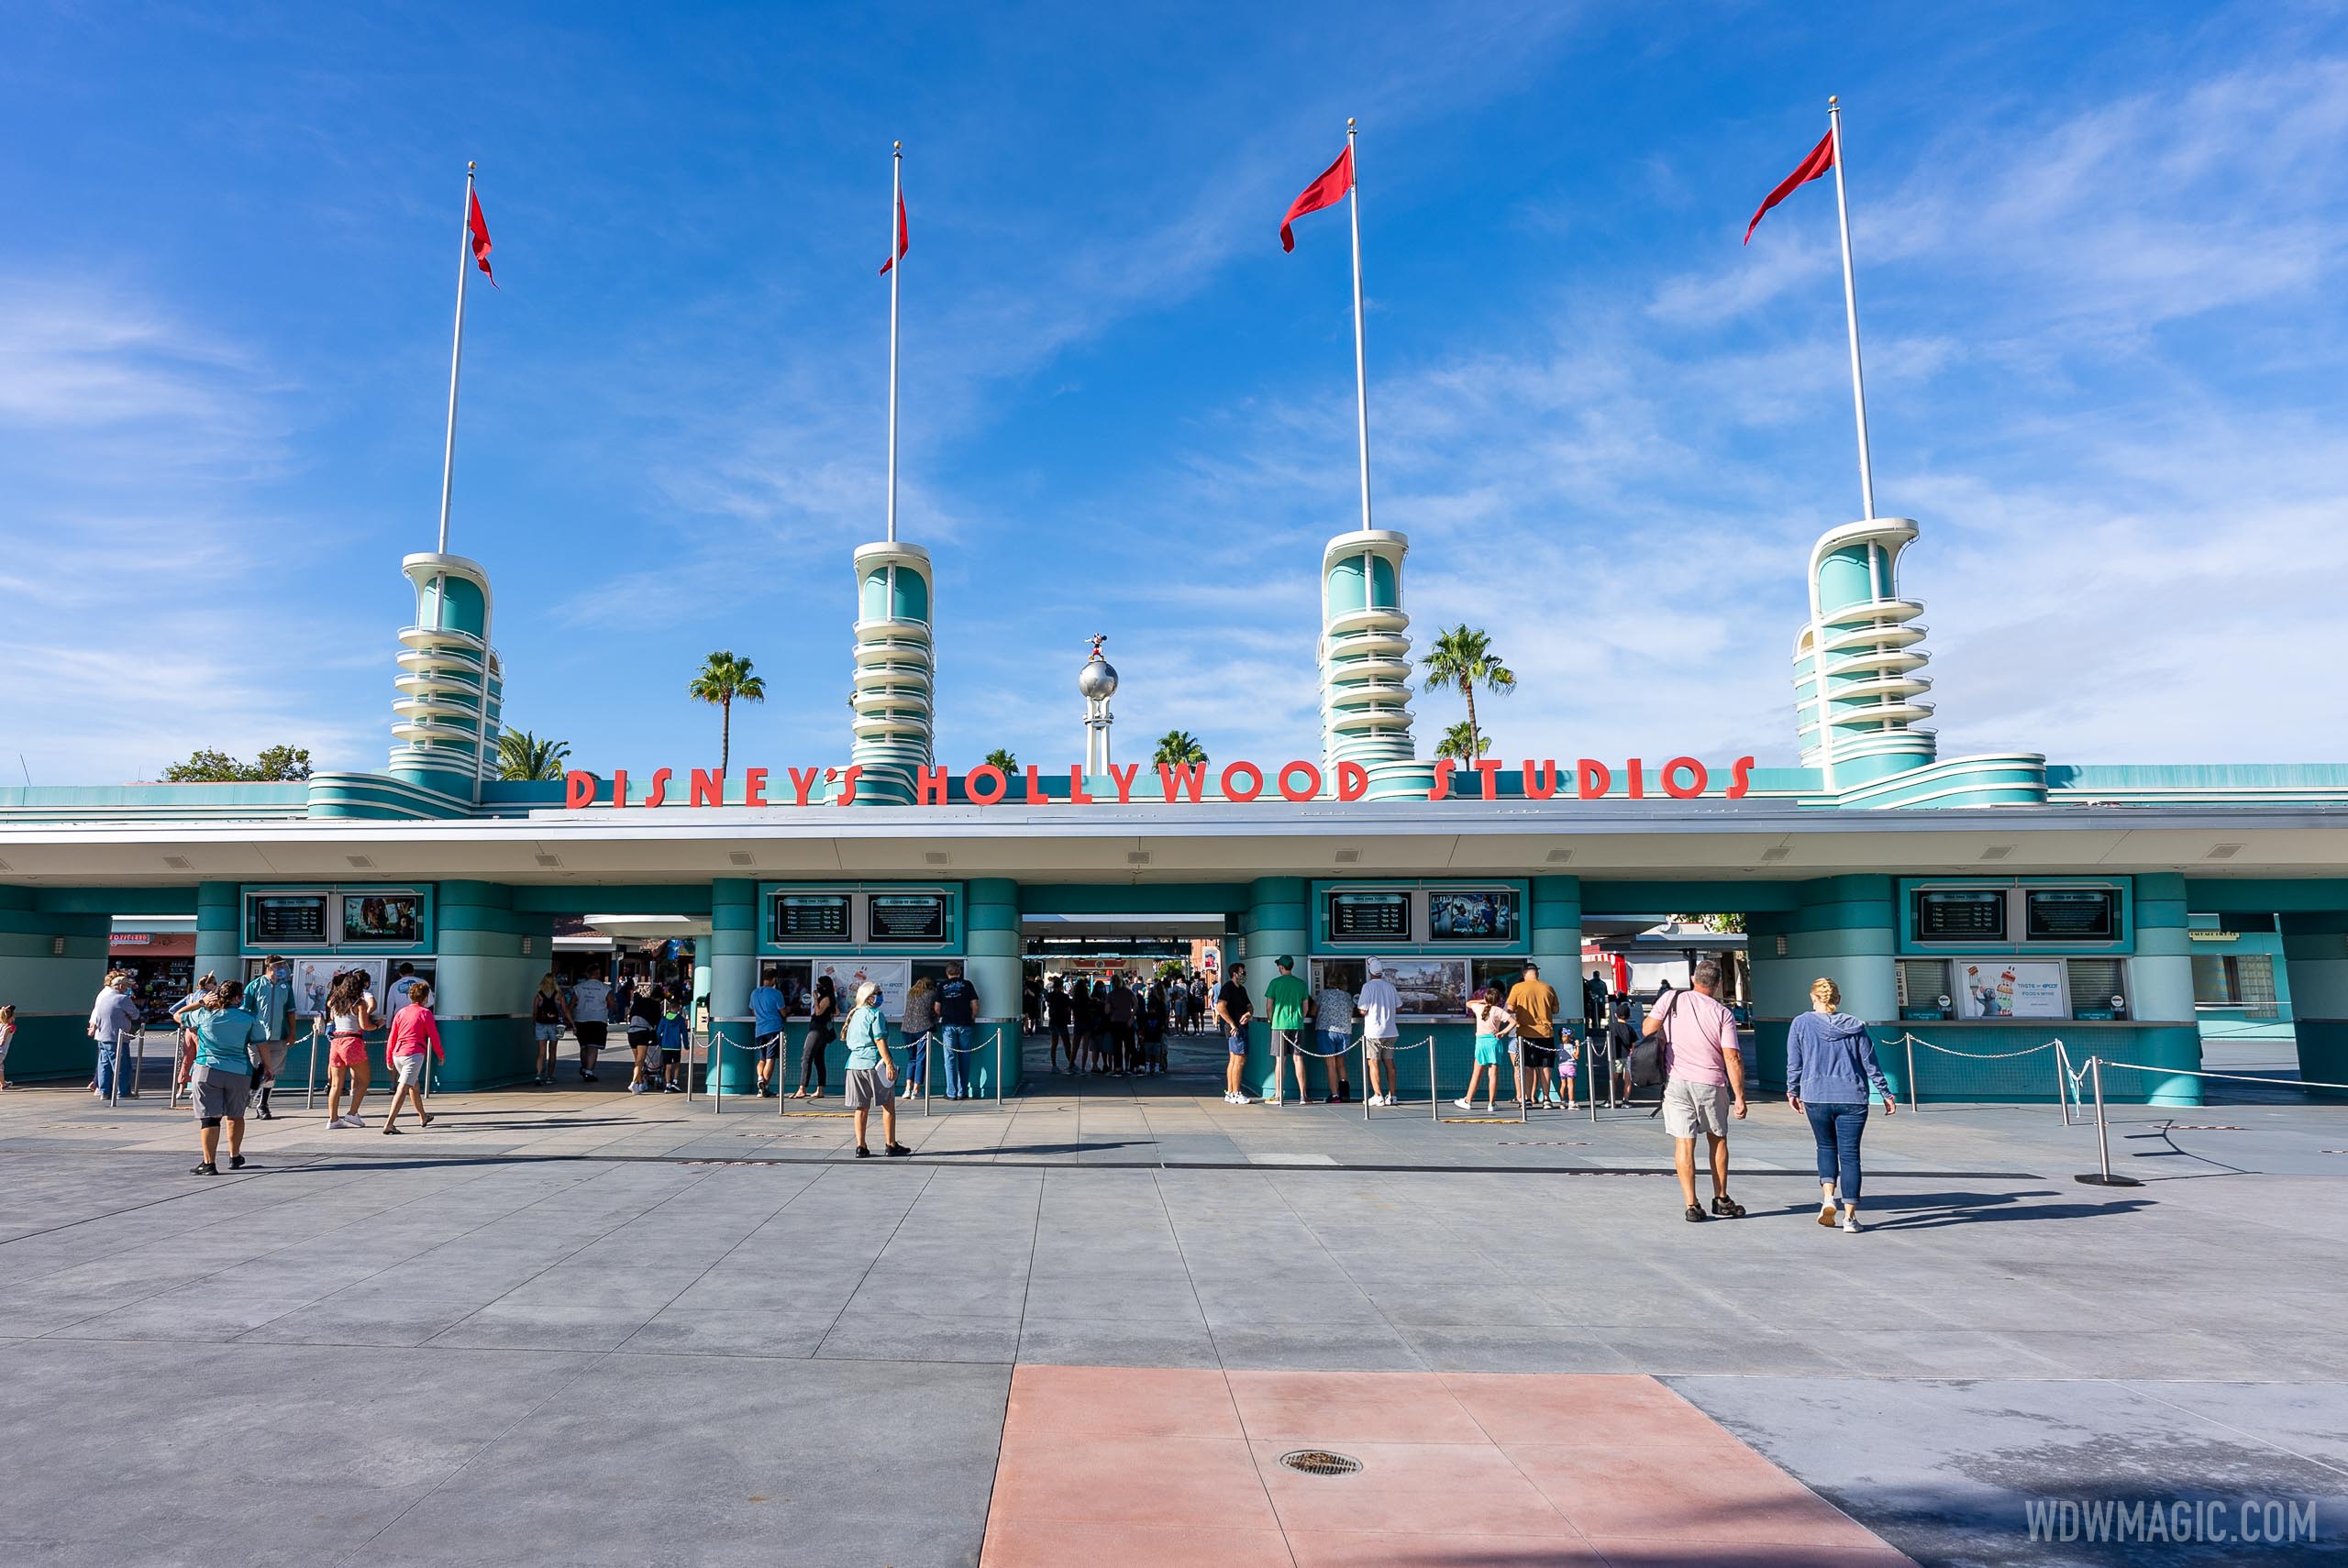 Walt Disney World theme parks increase capacity but see longer waits and less physical distancing